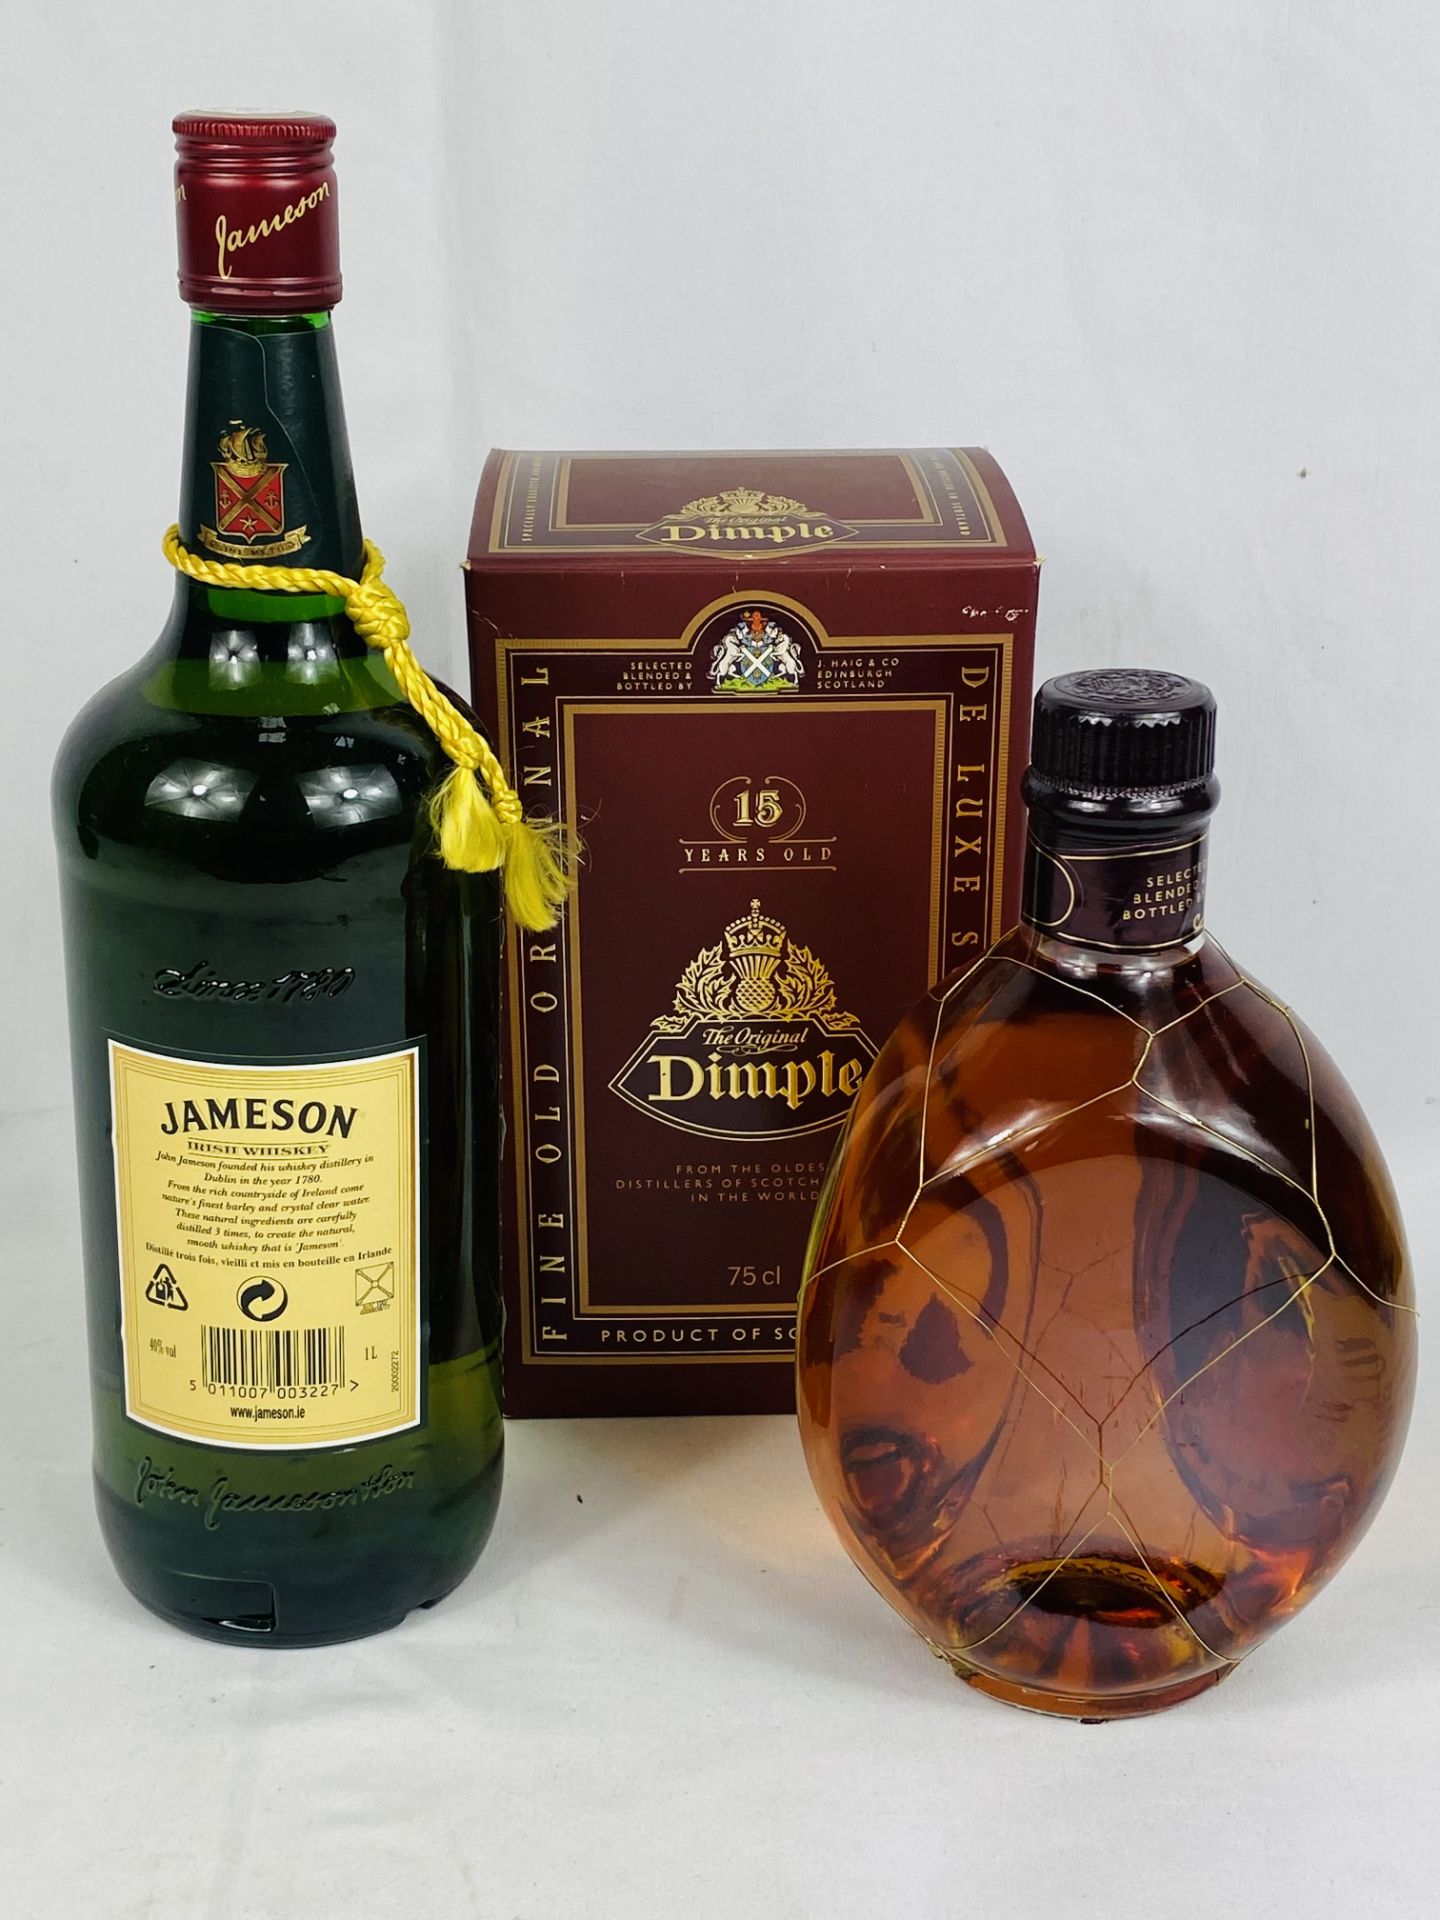 1L Jameson Irish whisky and Dimple Scotch whisky - Image 2 of 3